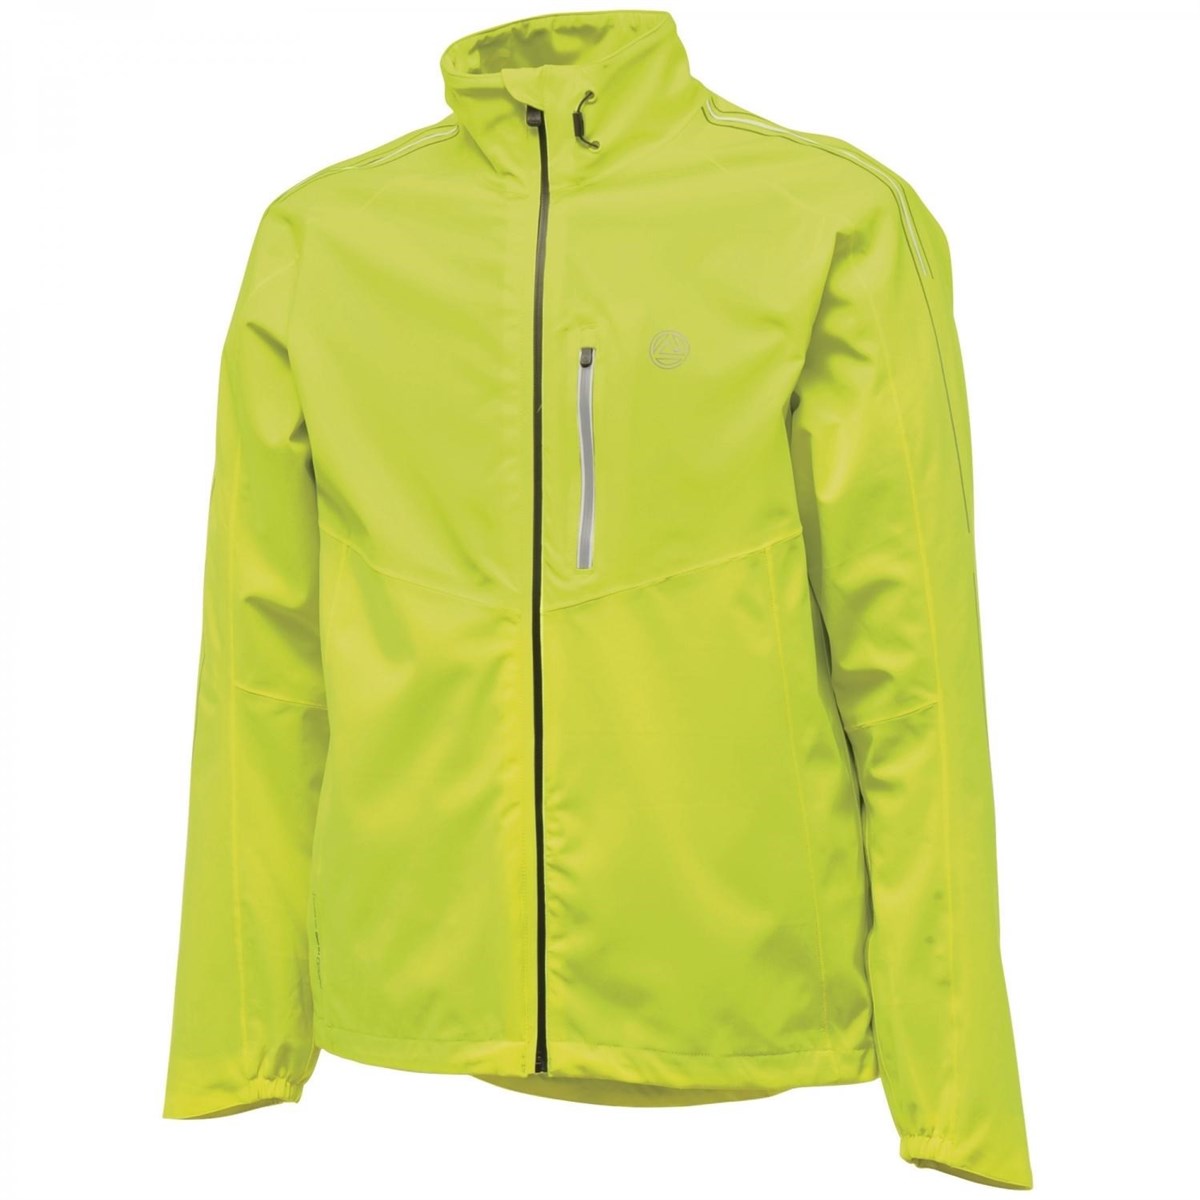 Dare2B Outshine Waterproof Cycling Jacket SS16 product image